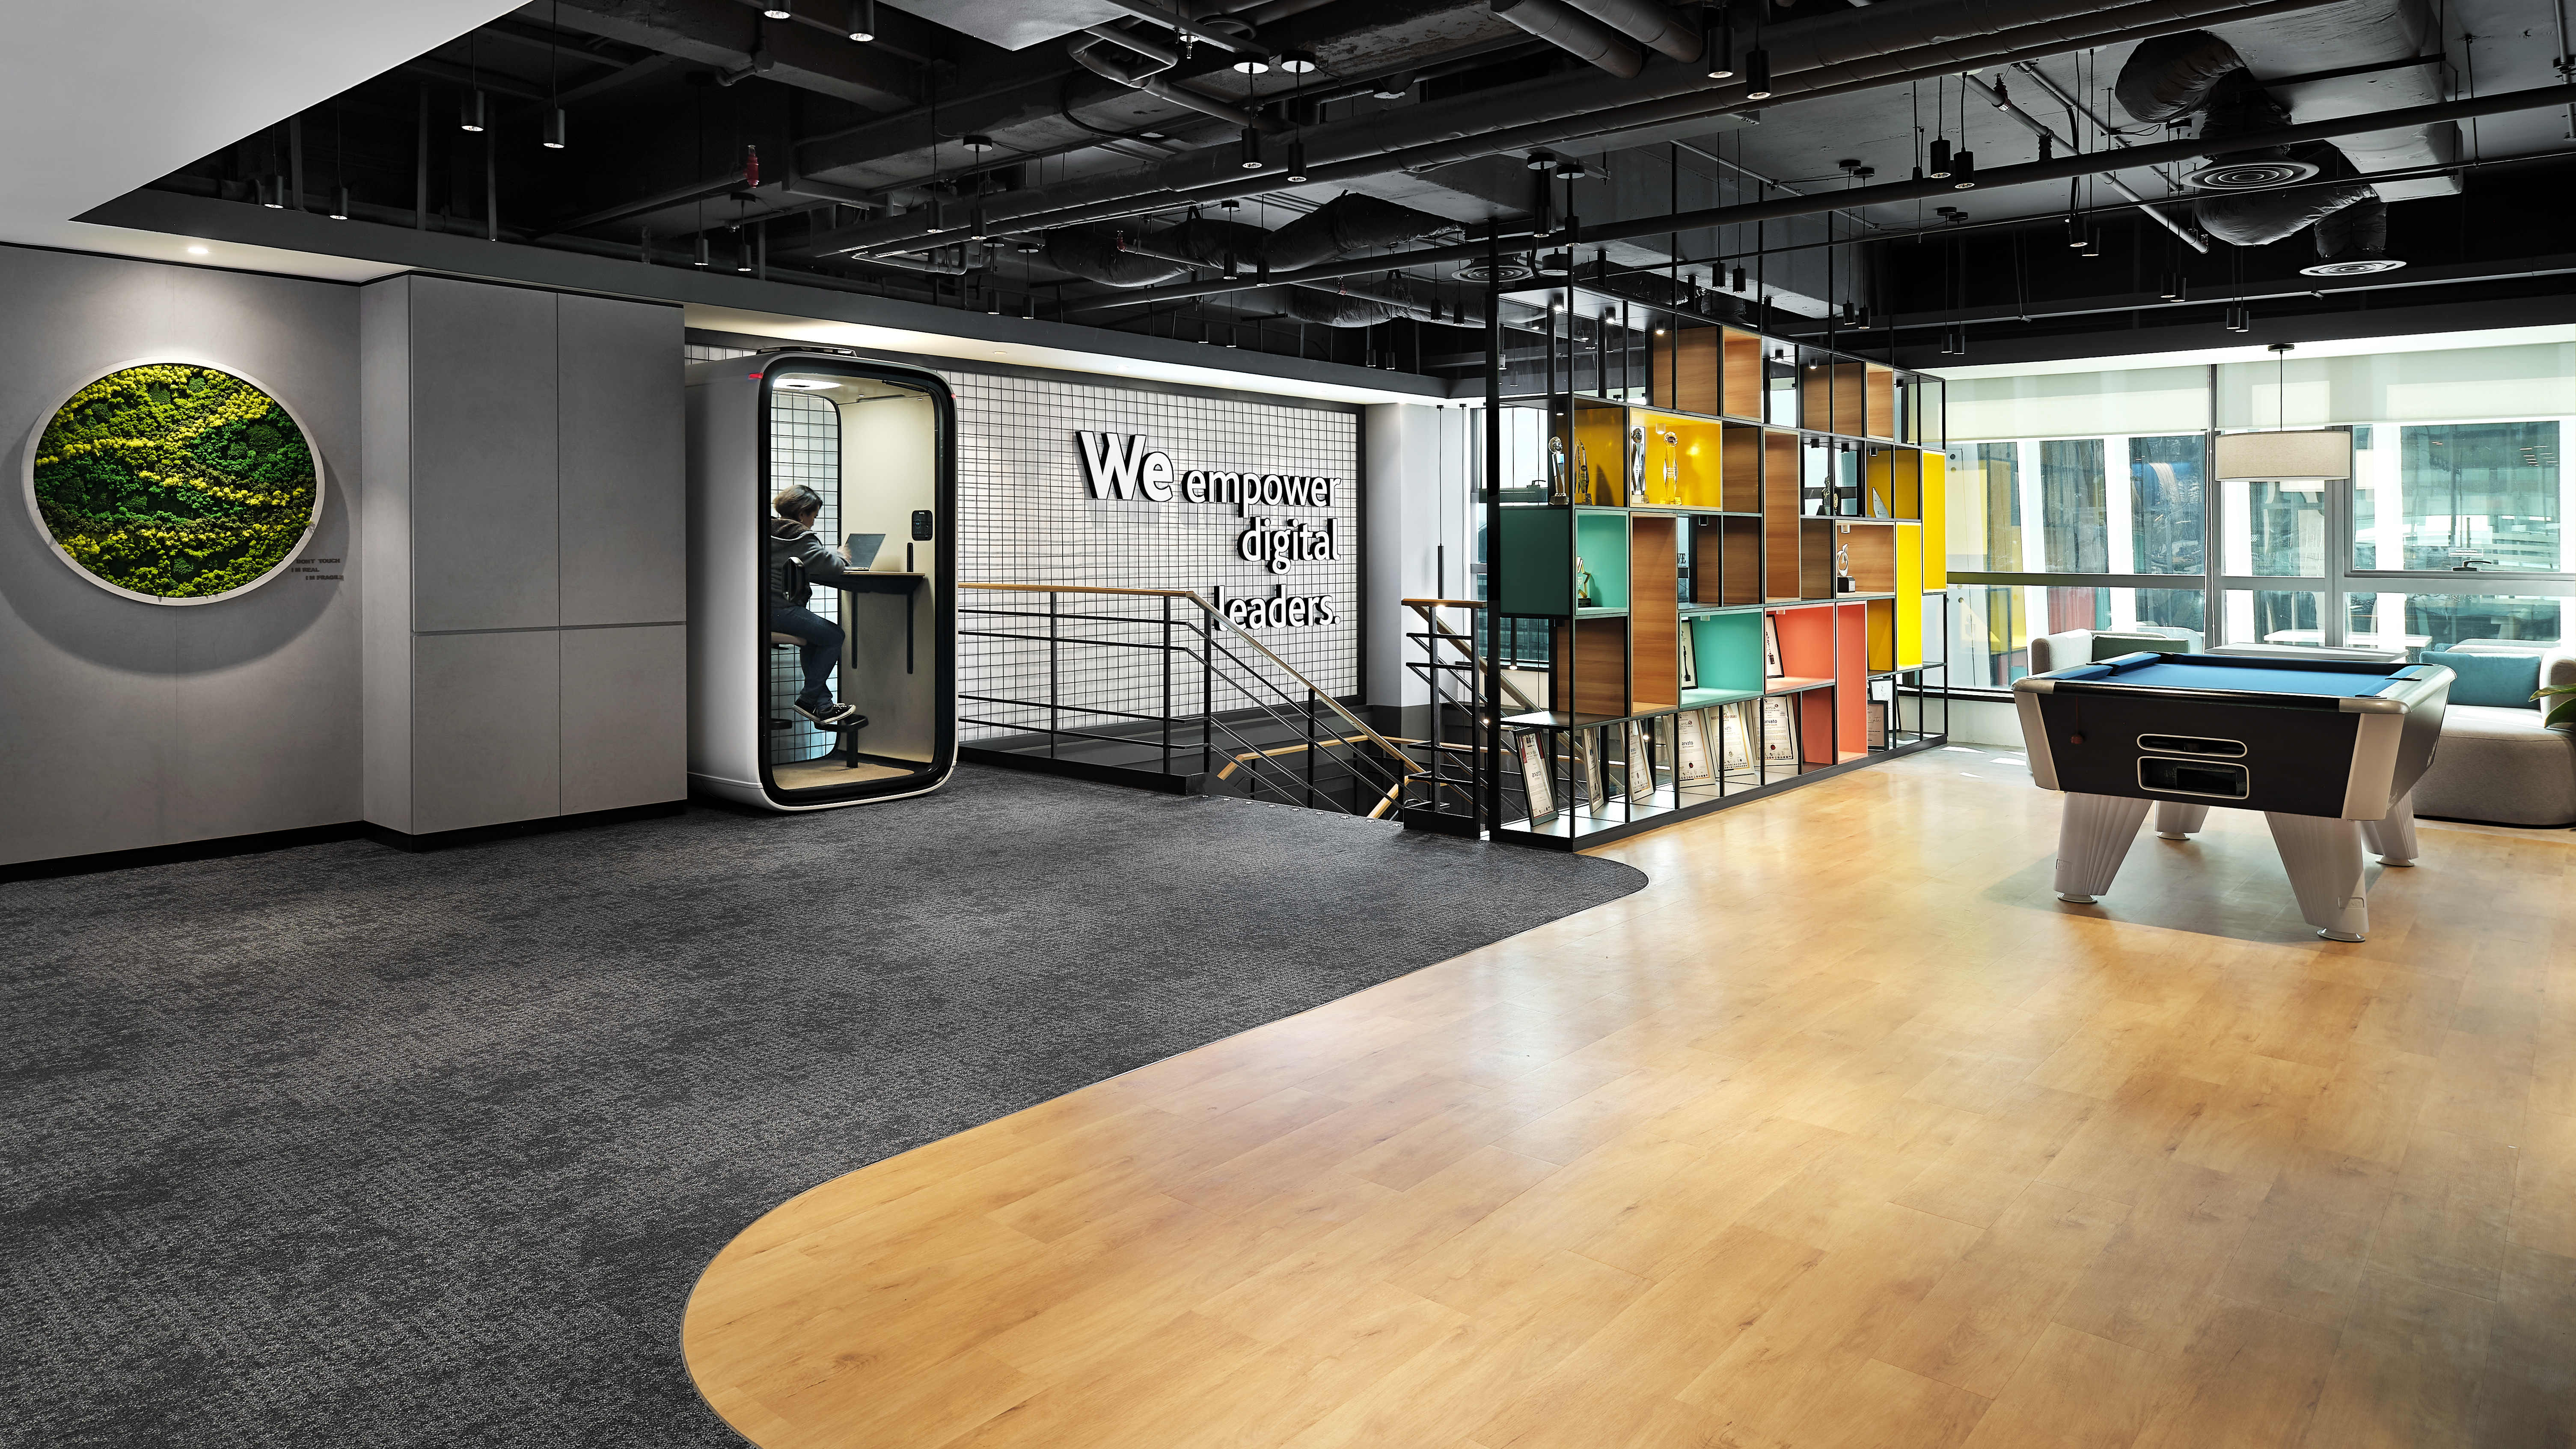 A Modern and Adaptive Workplace for Employees